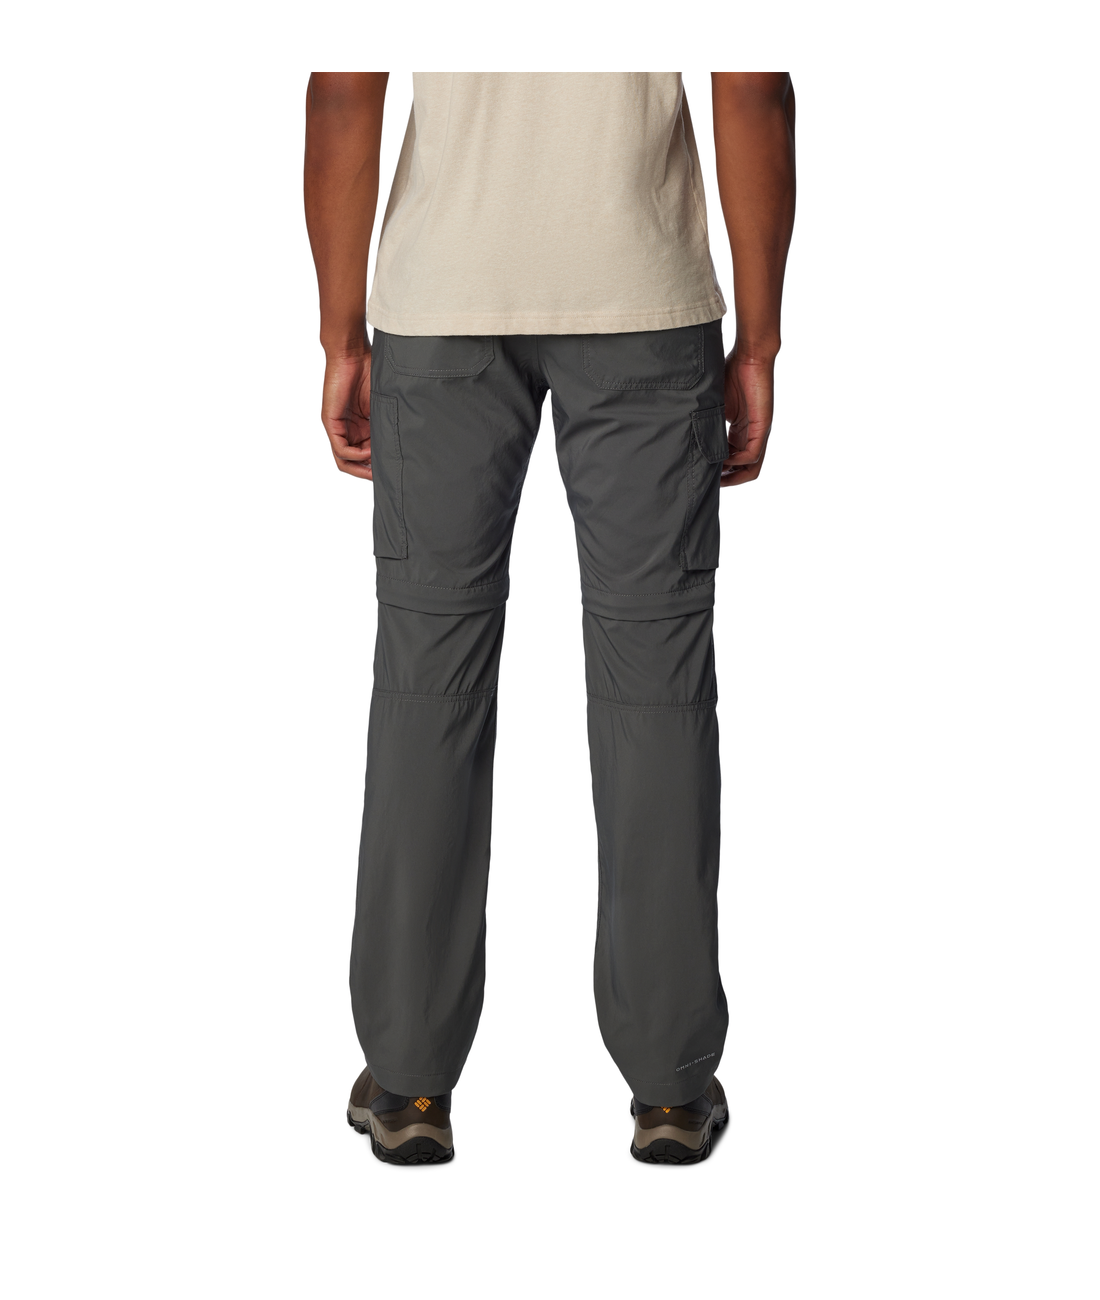 Silver Ridge Utility Convertible Pant - 34 Schrittlnge